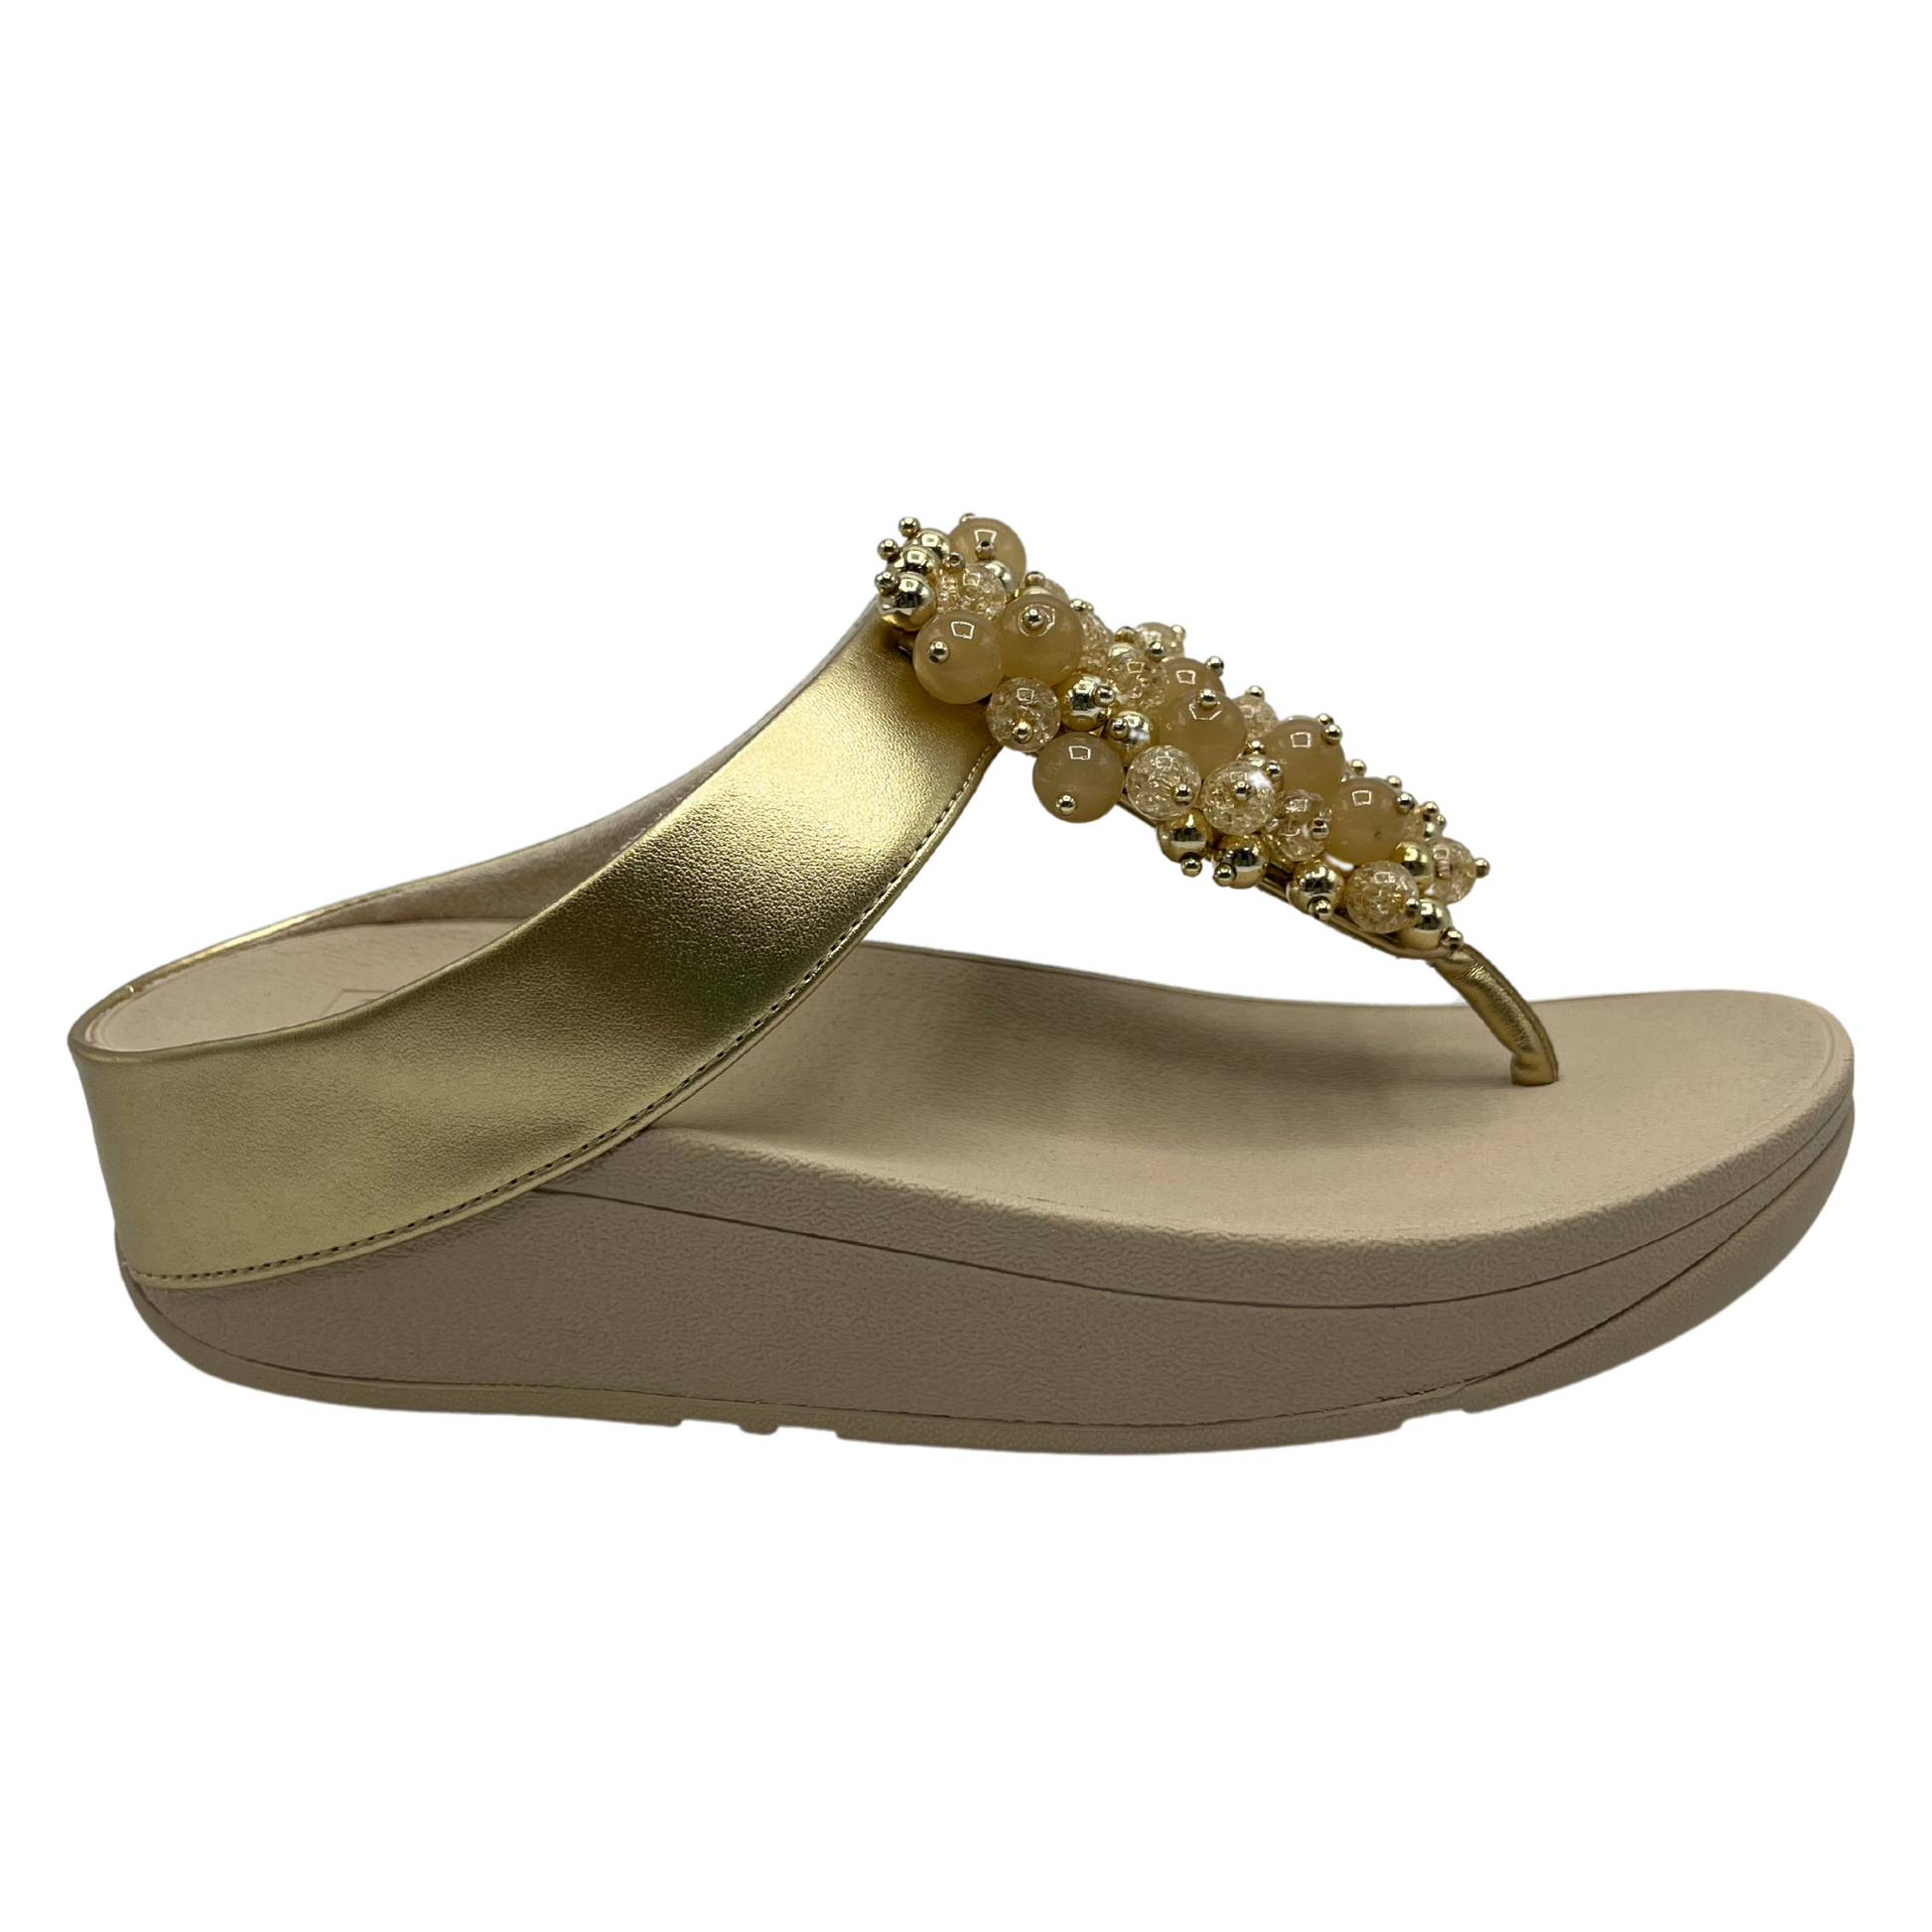 Right facing view of gold sandals with round embellishments on front strap and lightweight platform sole